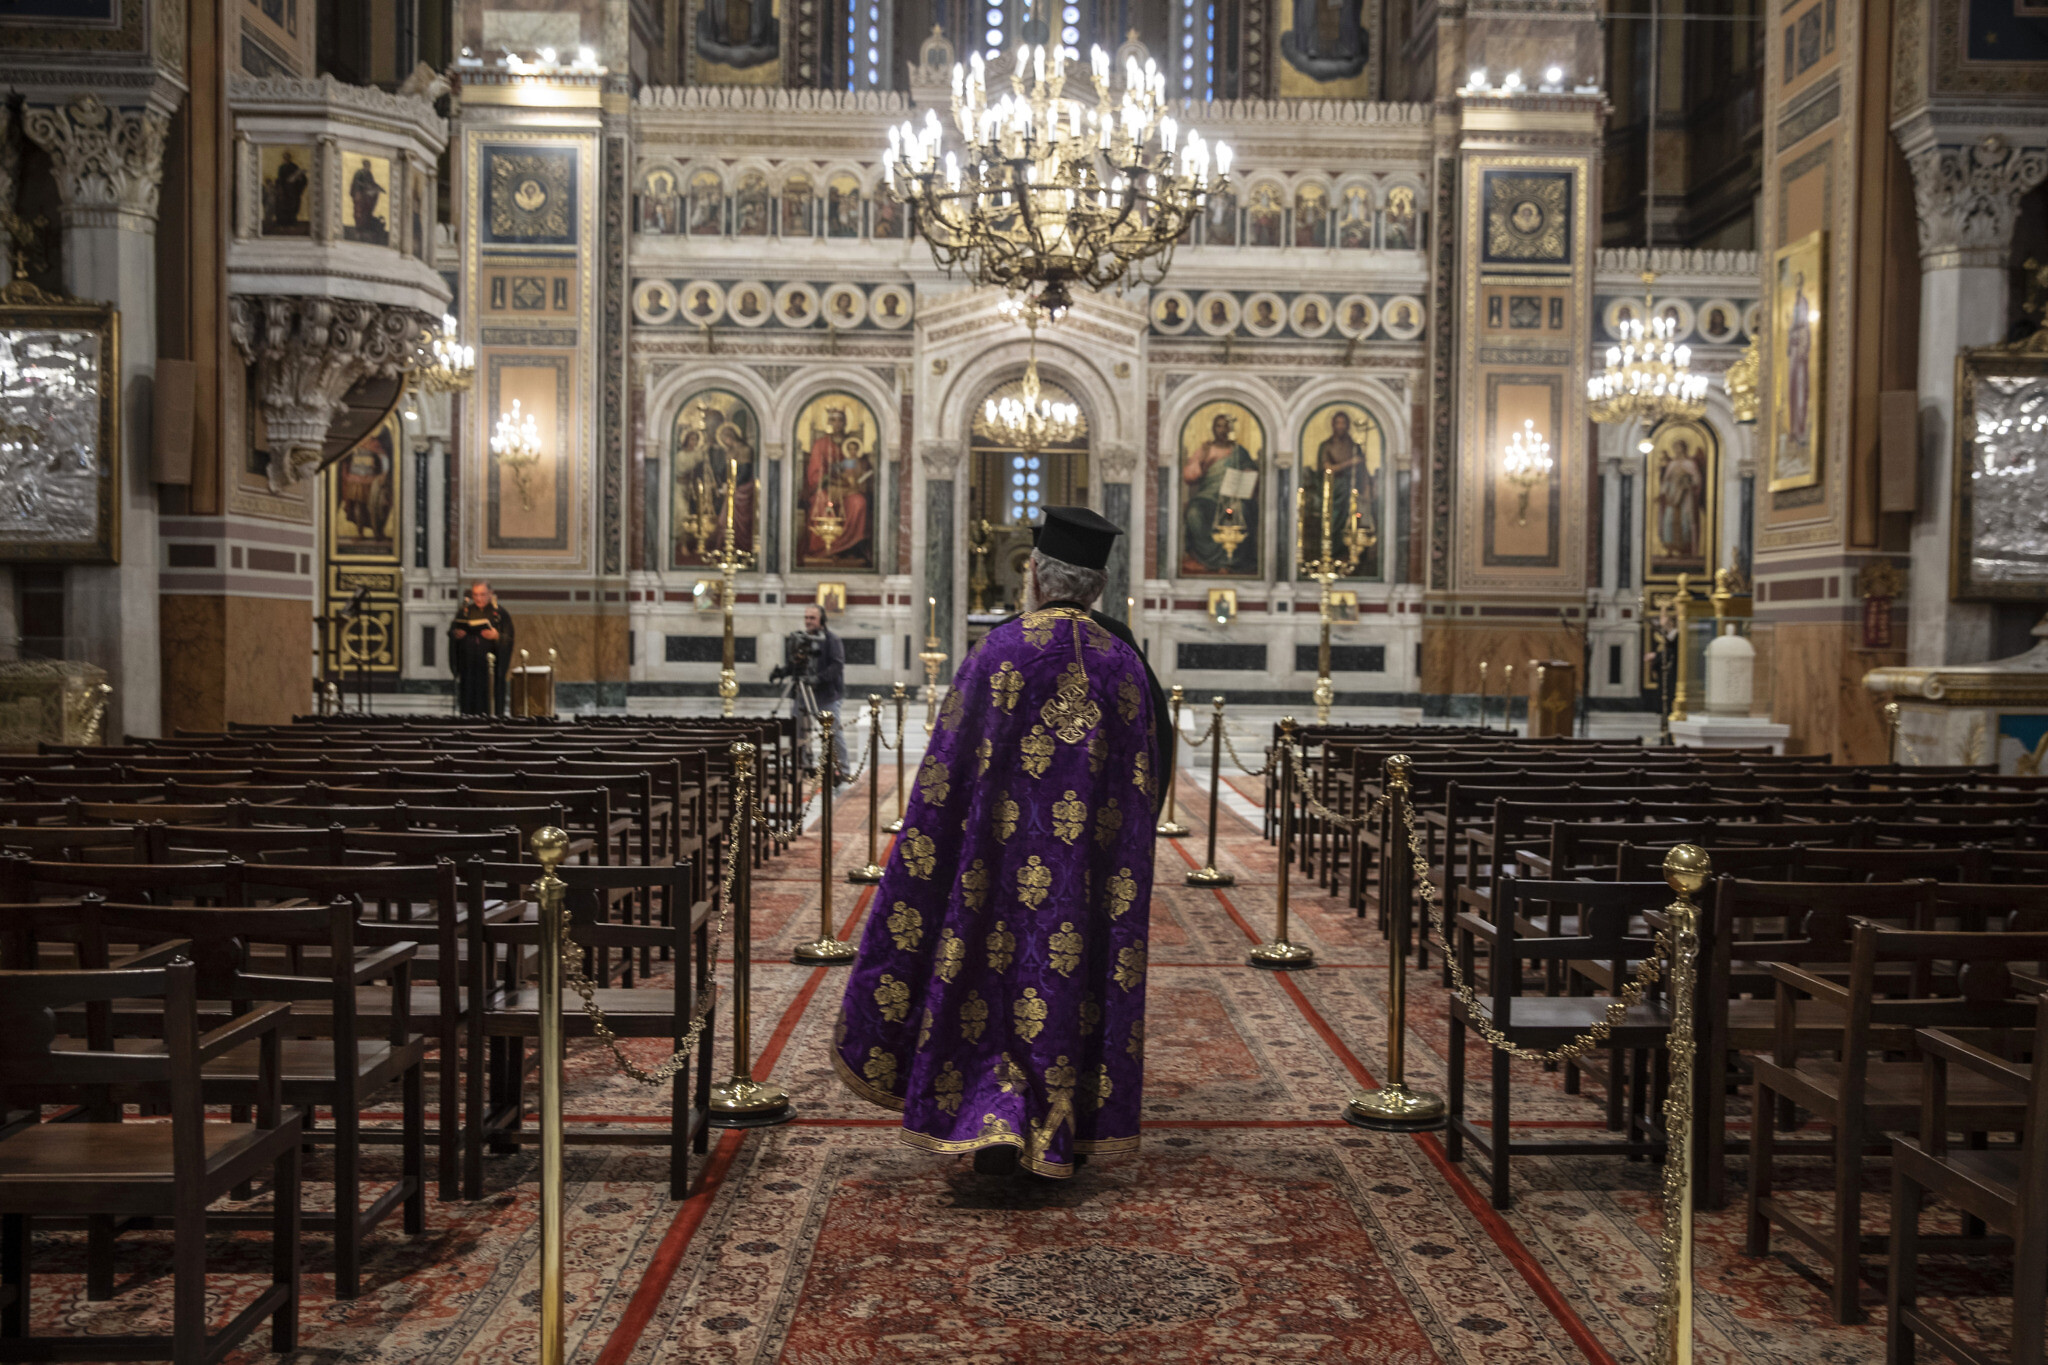 Lockdown weighs heavily on Orthodox Christians during Easter The